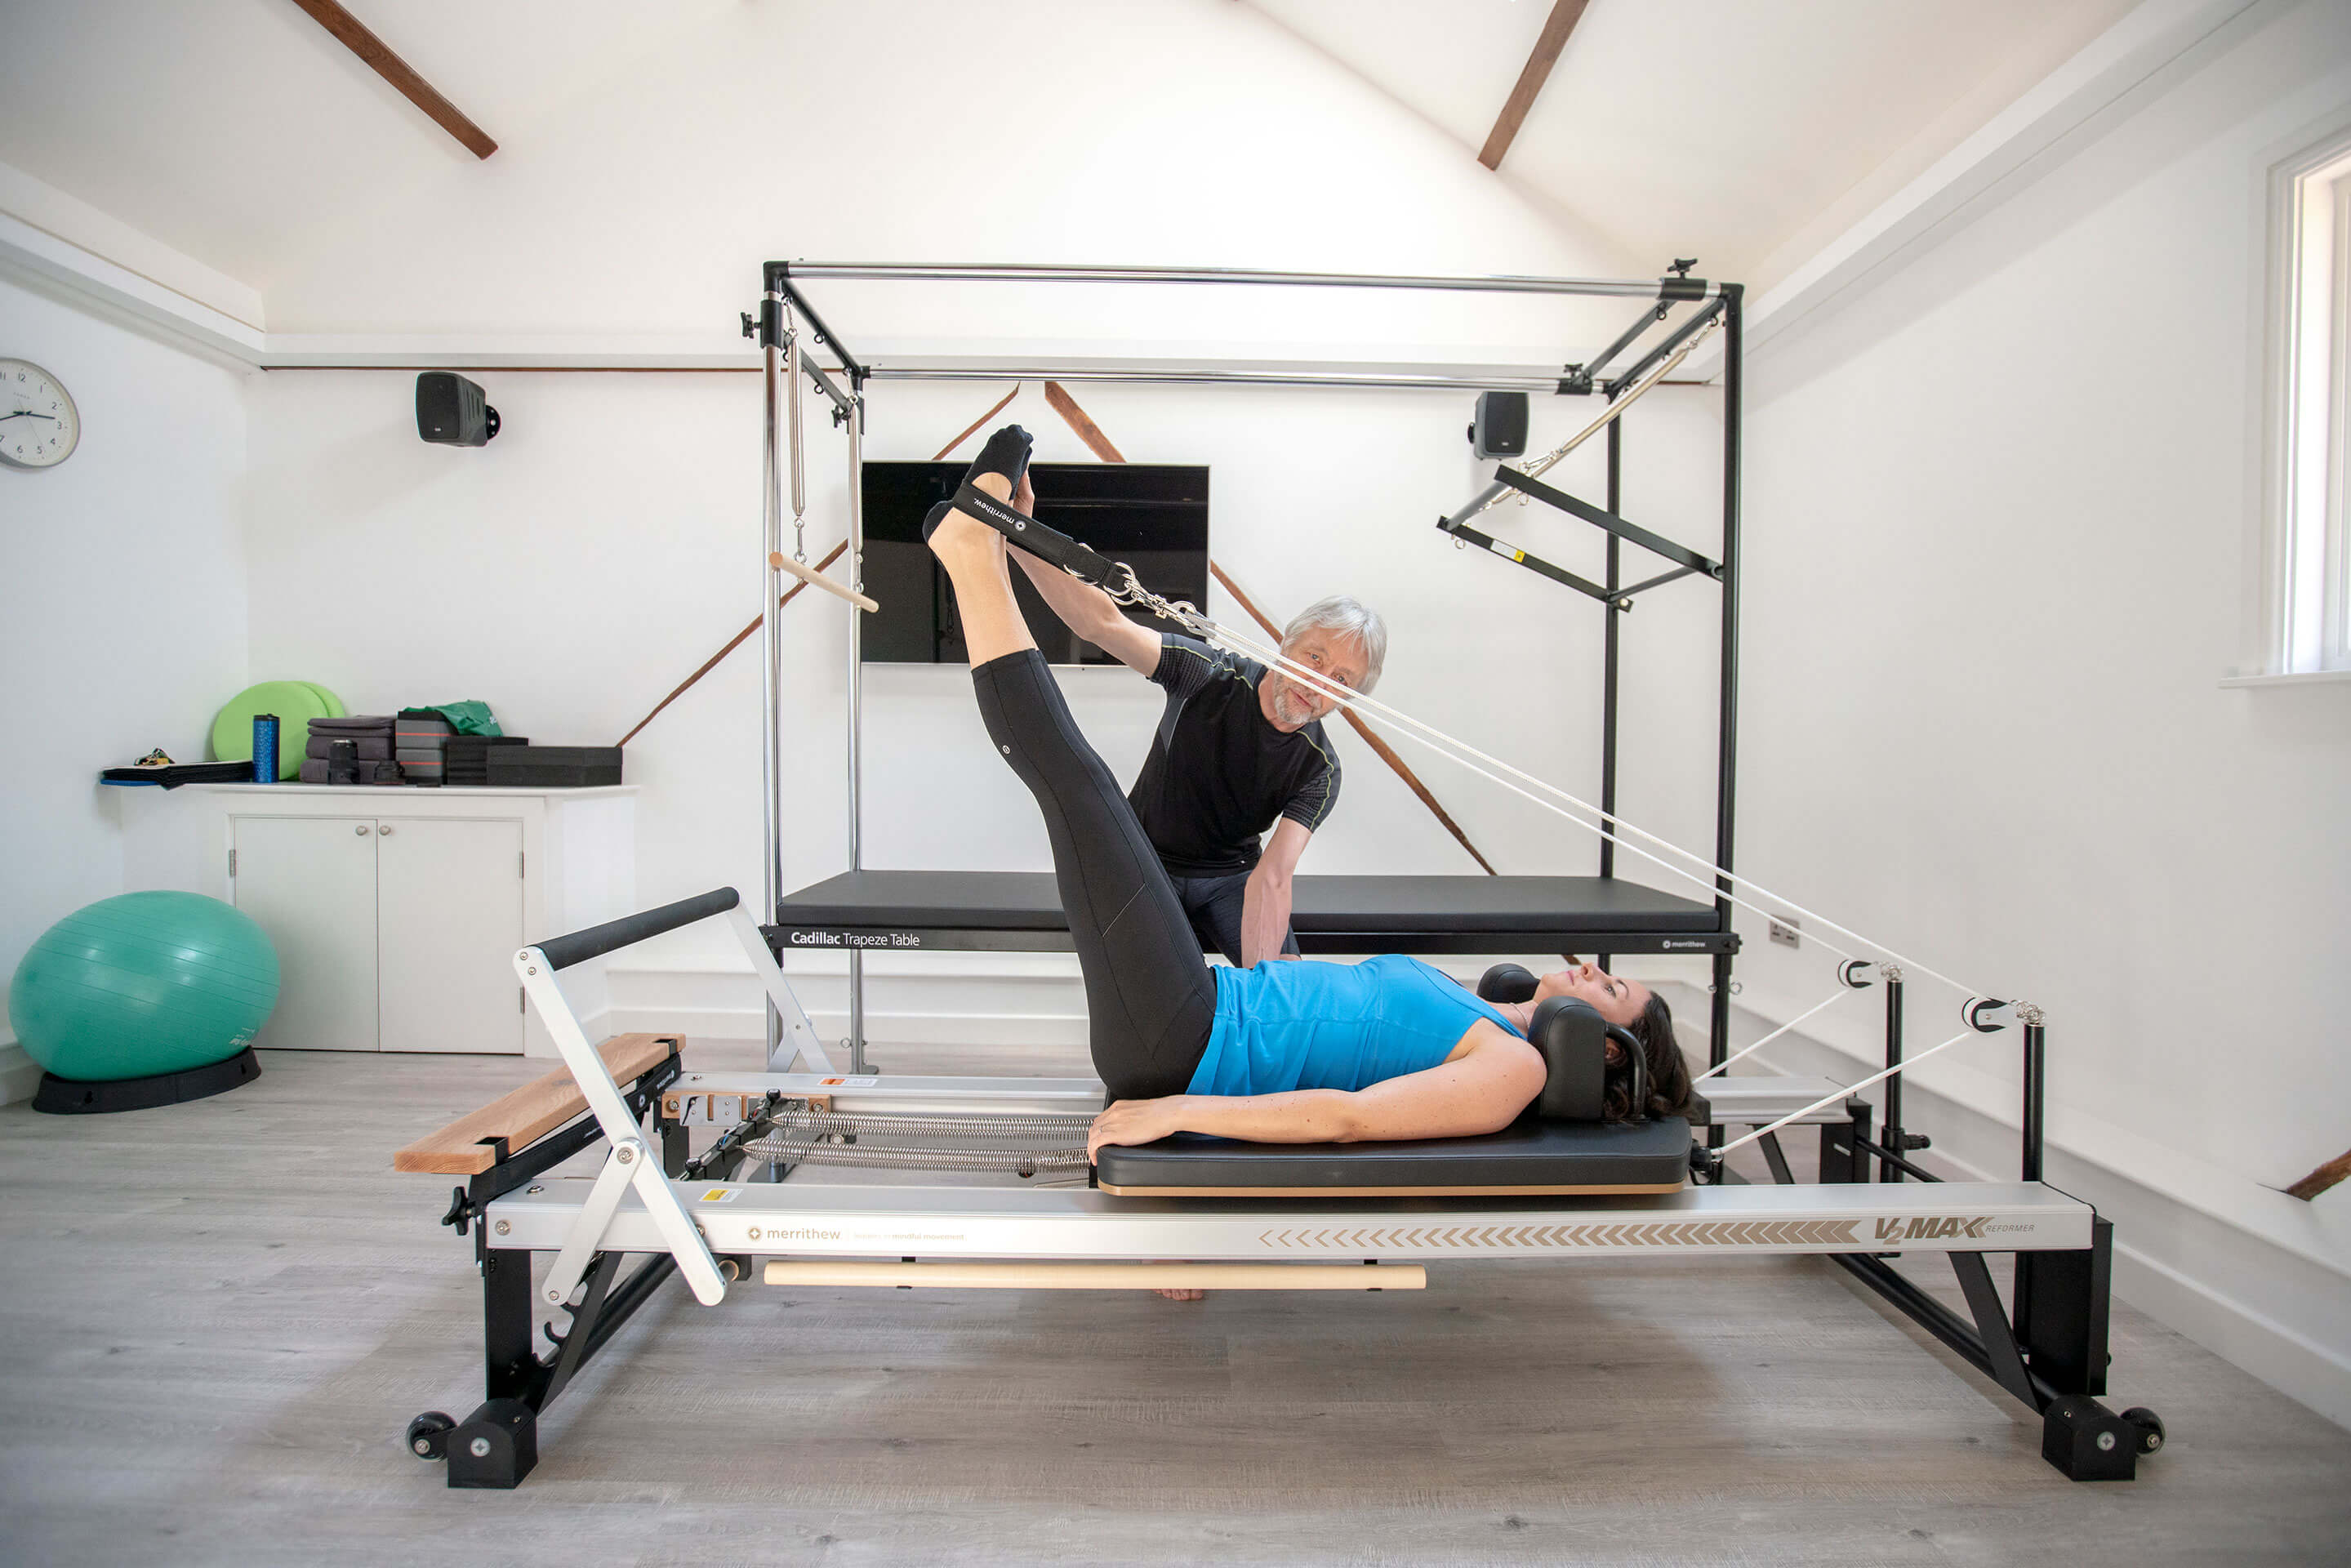 We have a fully kitted out Pilates studio with Reformer and Cadillac